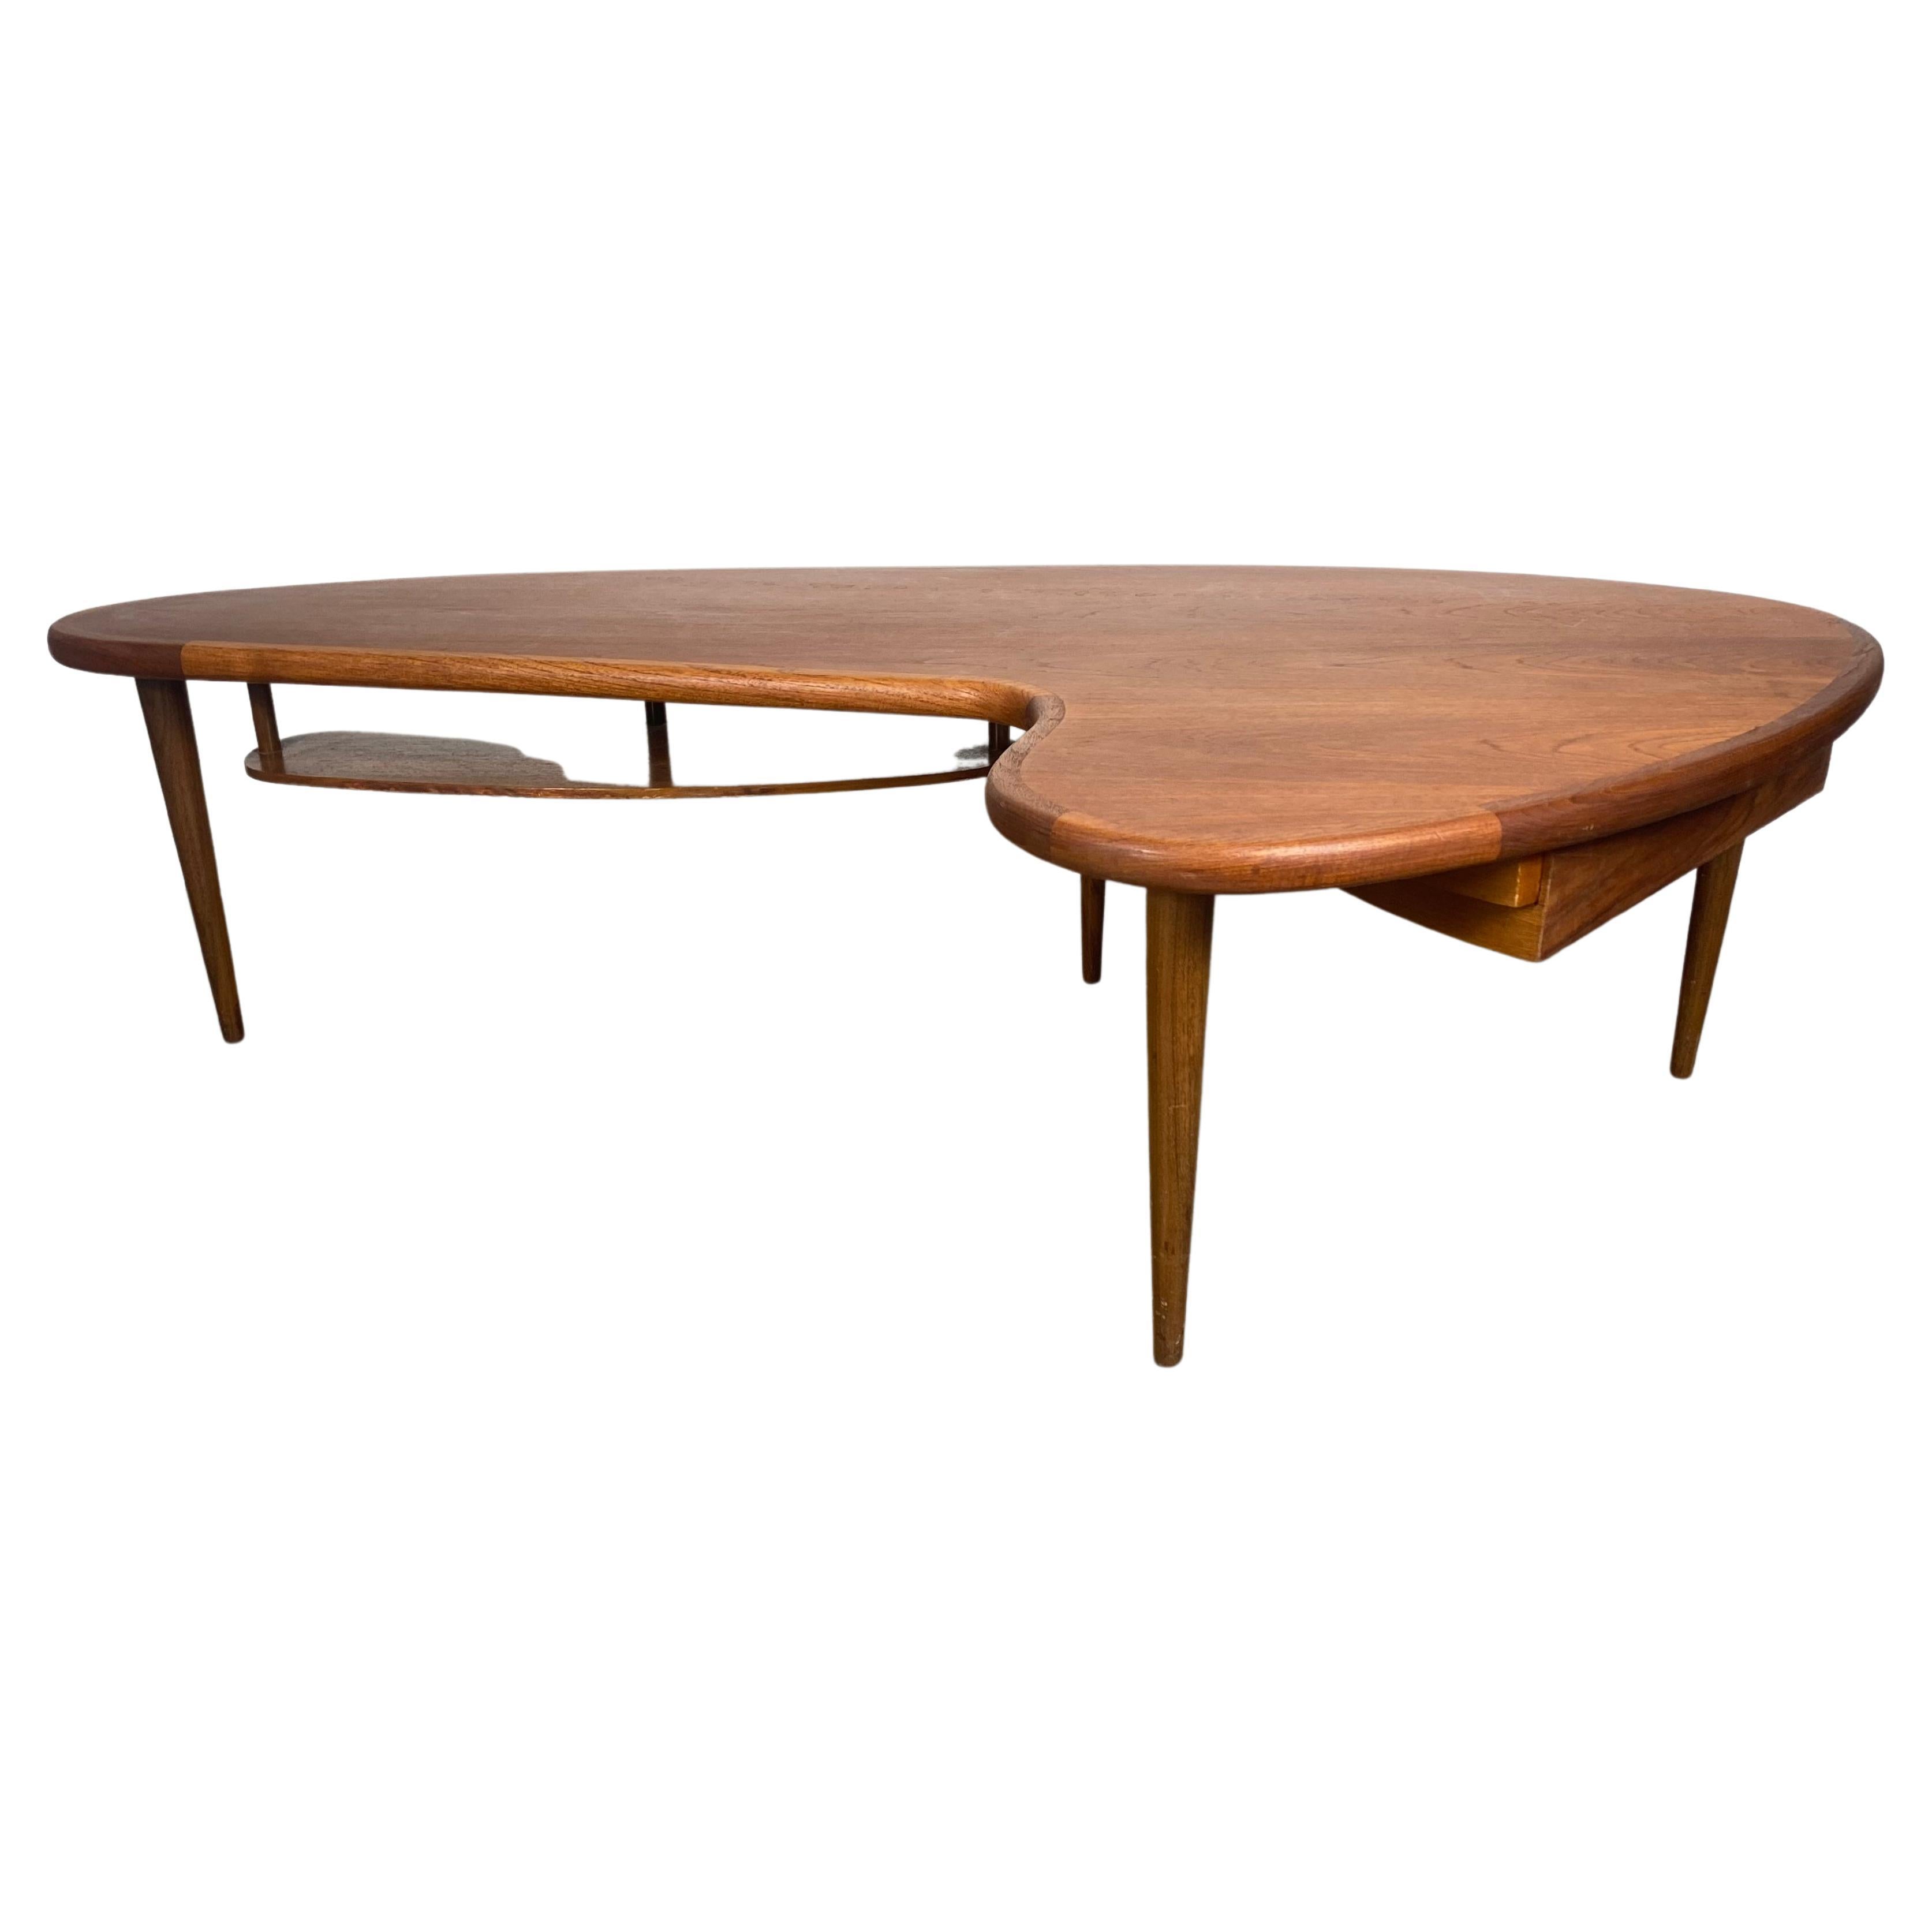 Classic Midcentury Walnut Boomerang Coffee / Cocktail Table with Drawer